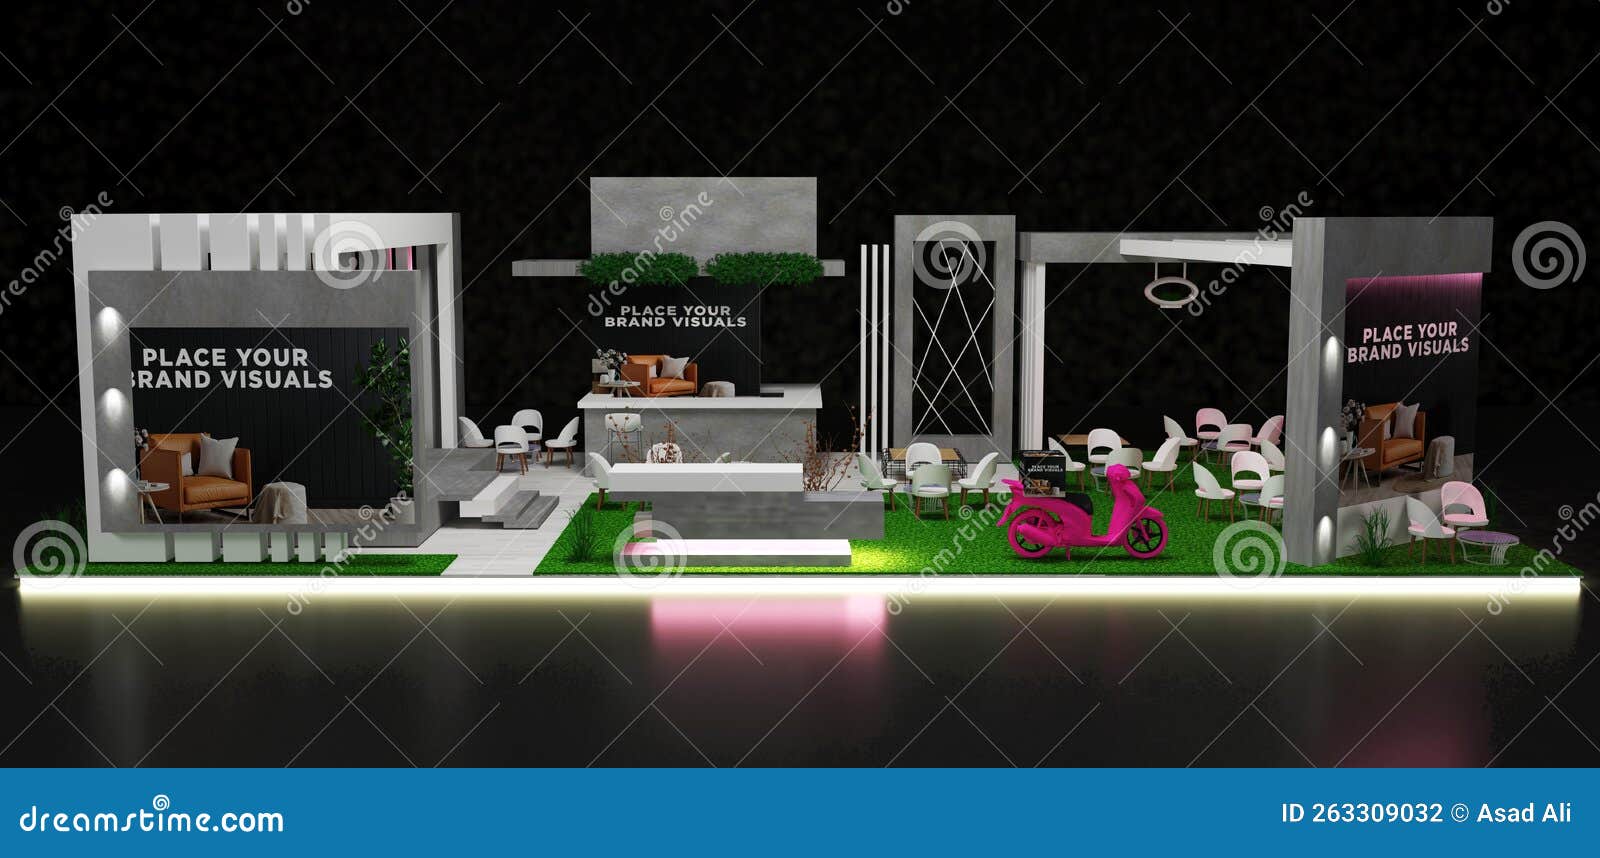 tarde exhibition stand corporate identity, display . empty booth. booth  trade show. 3d rendering